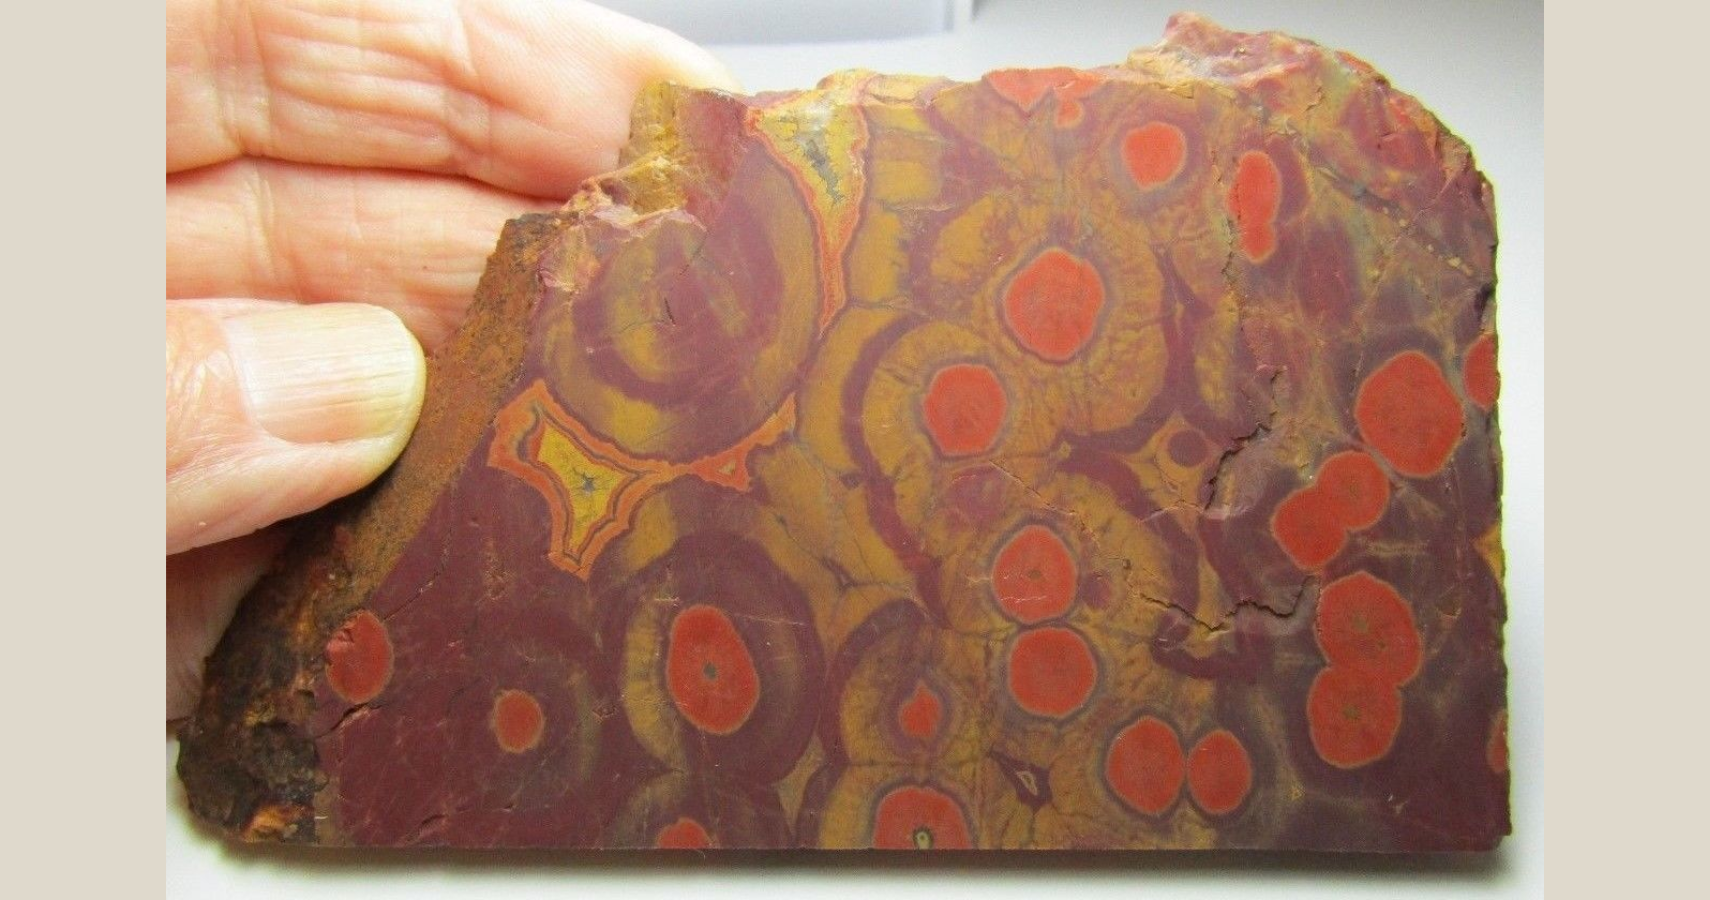 Morgan Hill Poppy Jasper - An Old-Looking Stone With Many Pluses